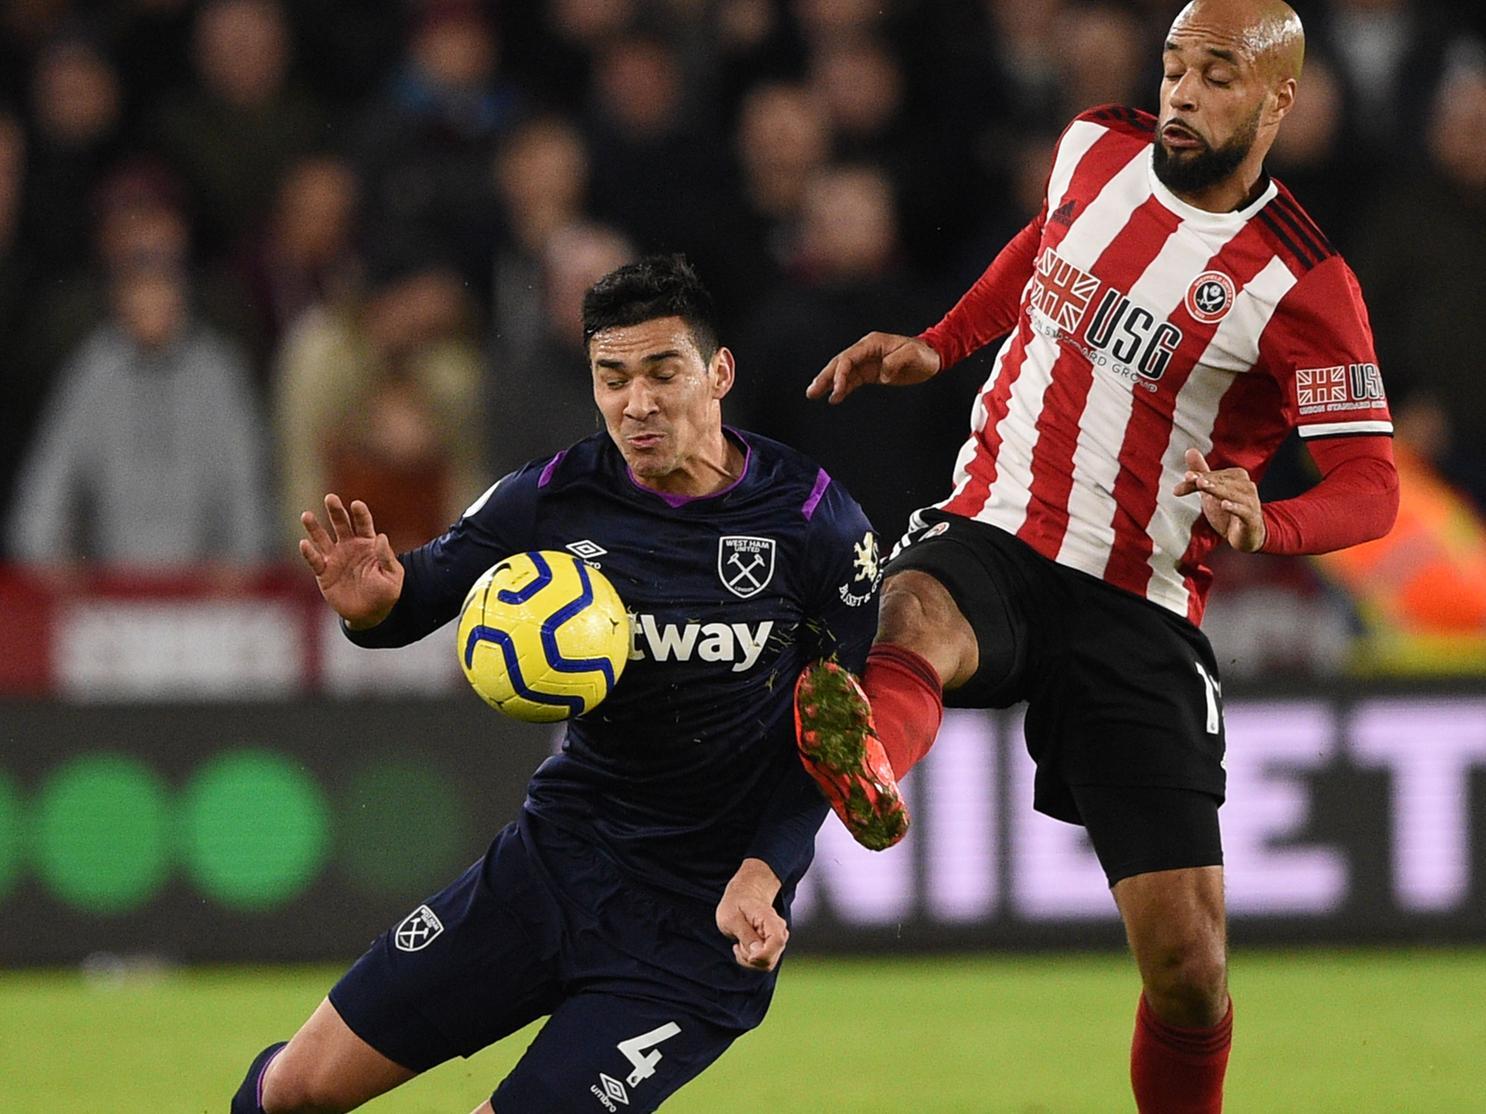 West Brom are reportedly keen to beat Championship rivals Leeds United to the signing of Sheffield United striker David McGoldrick. (Football Insider)